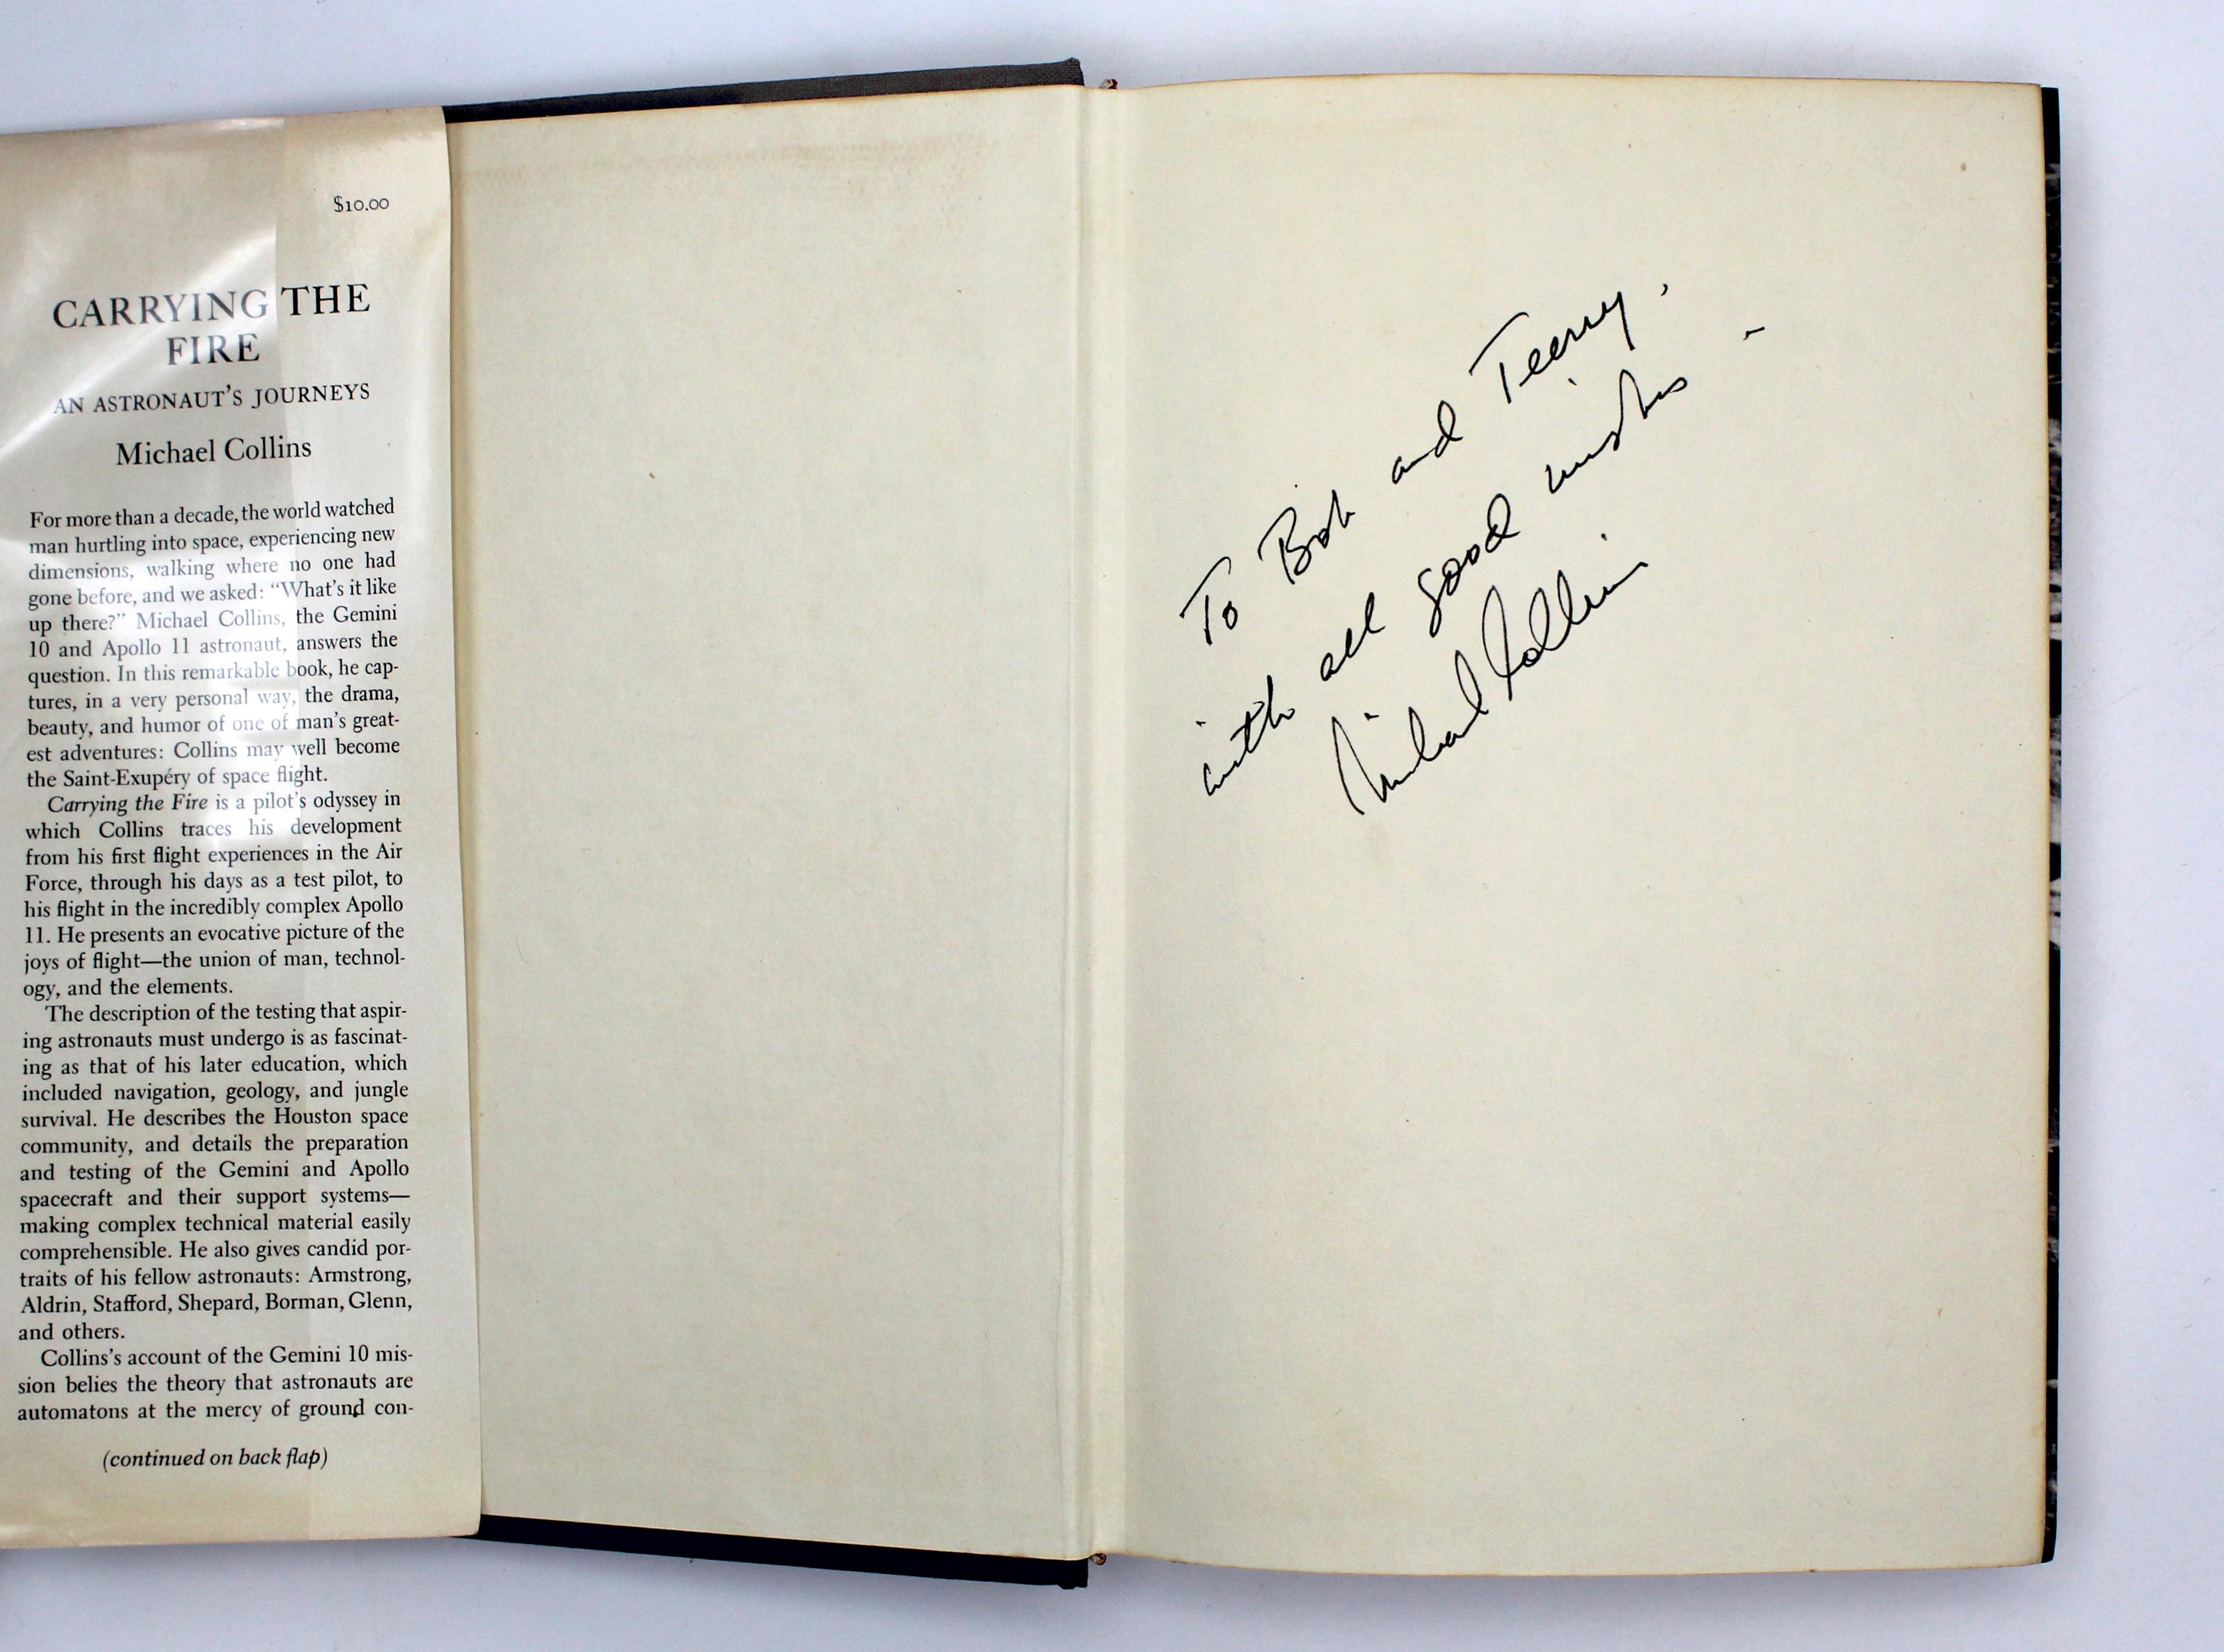 Collins, Michael. Carrying the Fire: An Astronaut’s Journeys. New York: Farrar, Straus and Giroux, 1974. First edition and first printing, signed and inscribed by Collins. The book includes the original dust jacket and is presented with a custom